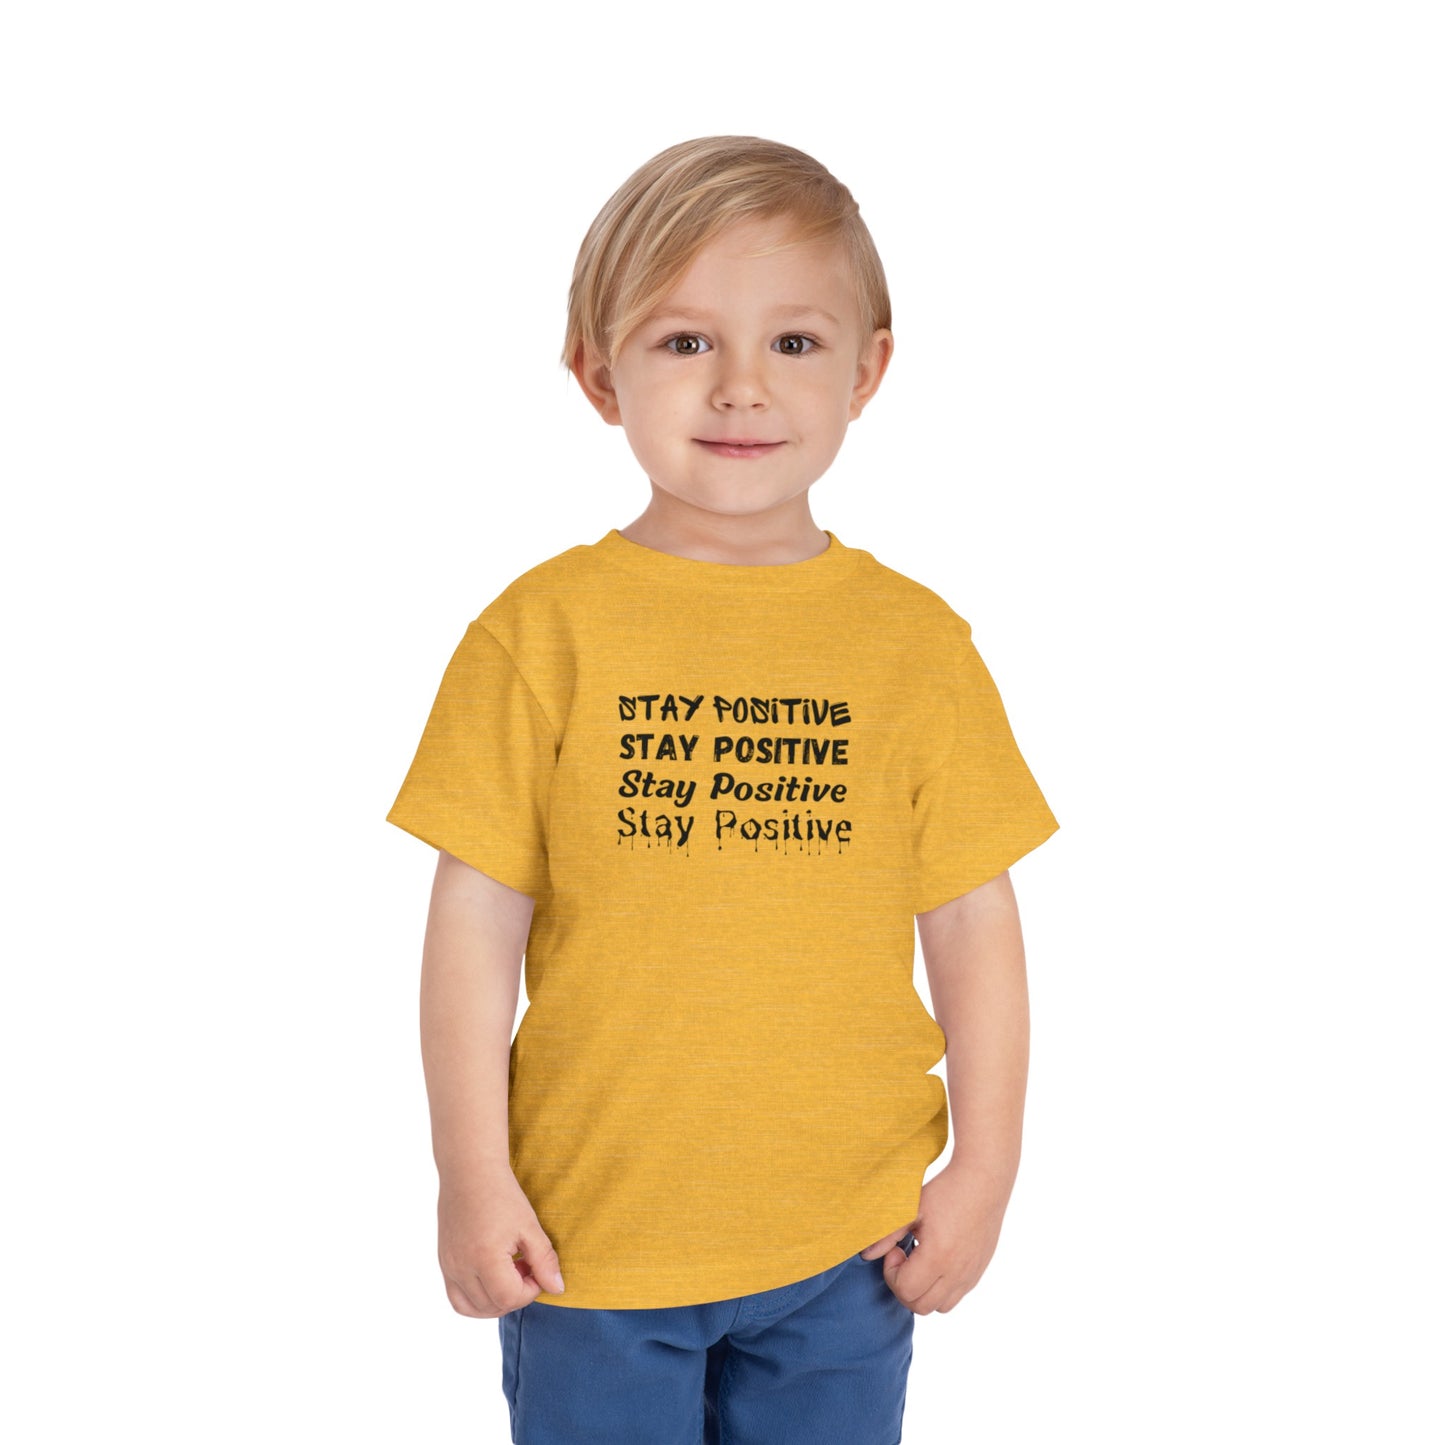 Stay Positive Toddler Short Sleeve Tee Black Drip